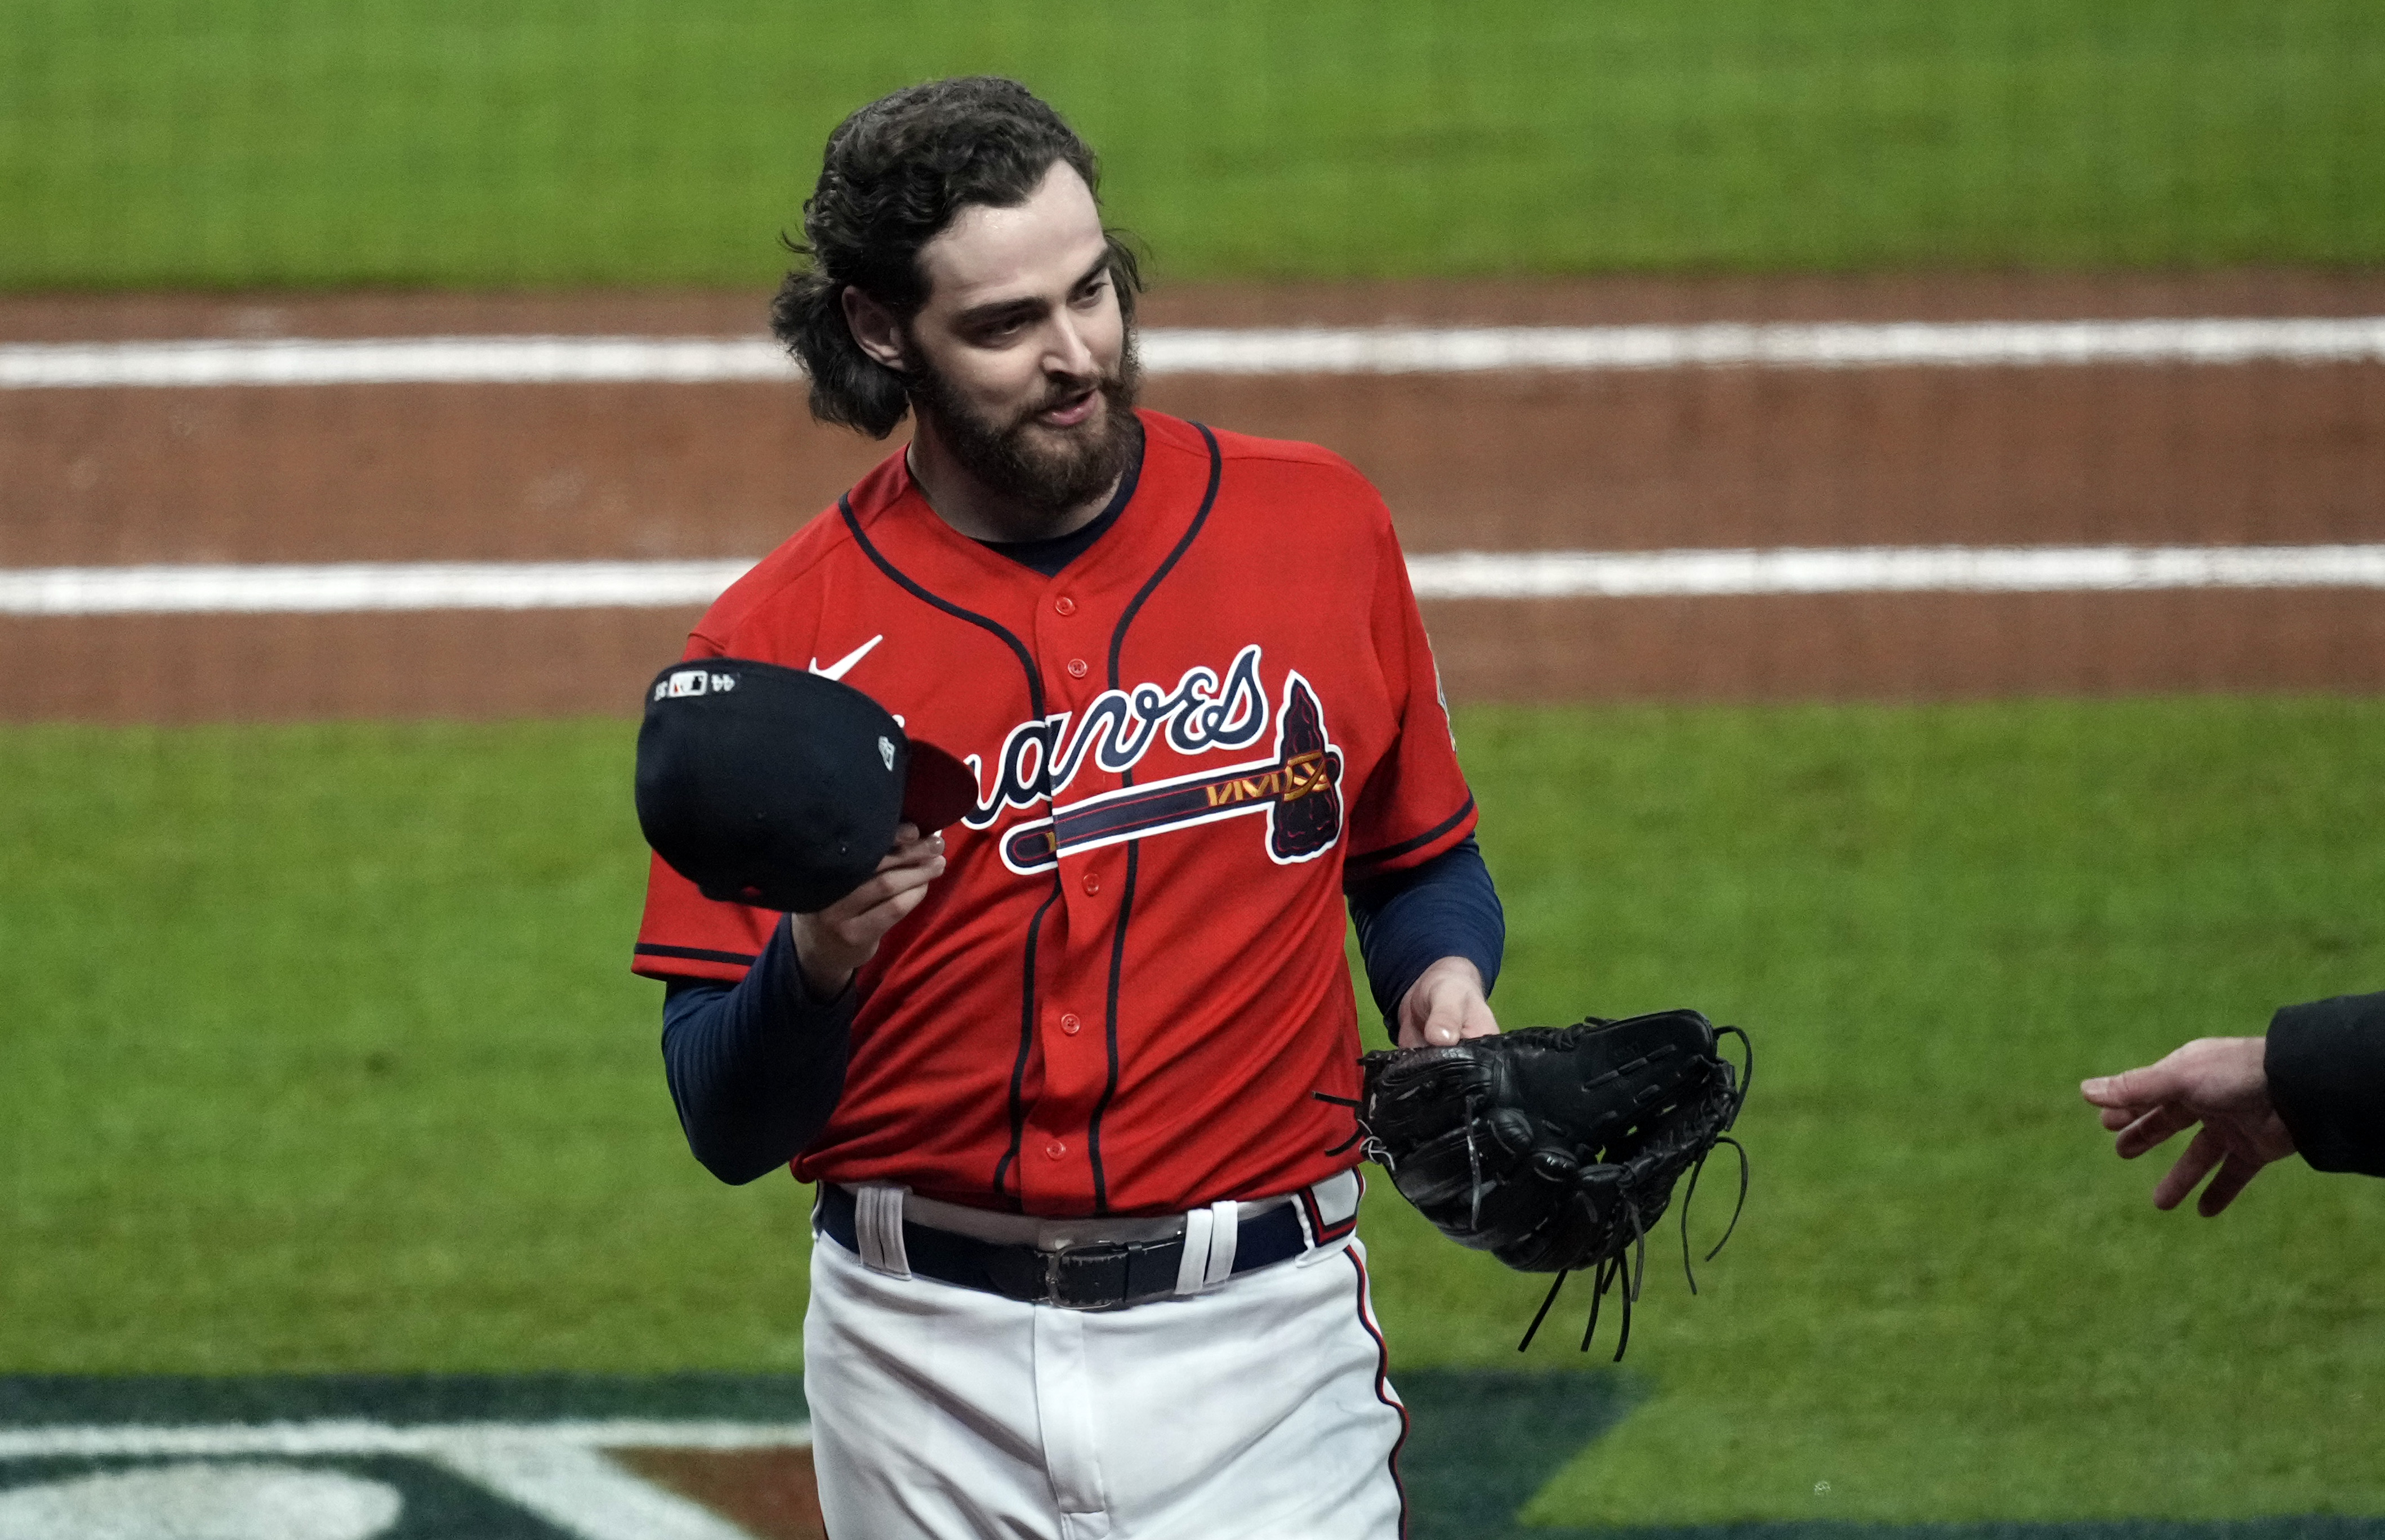 Gut' call to pull Anderson paid off for Braves in World Series